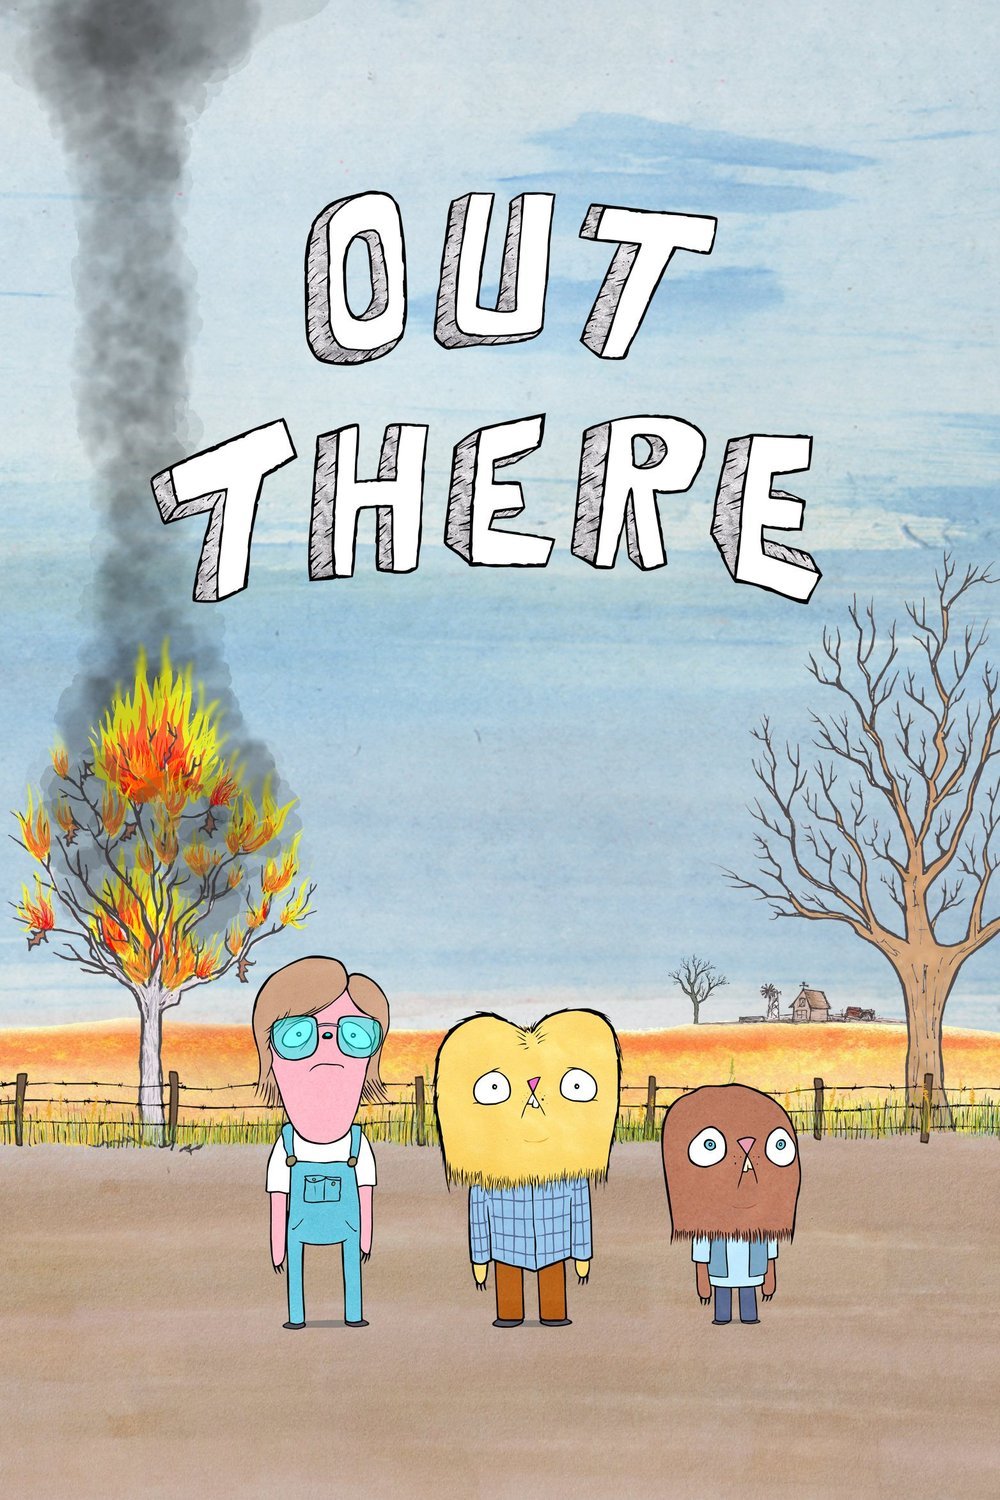 L'affiche du film Out There